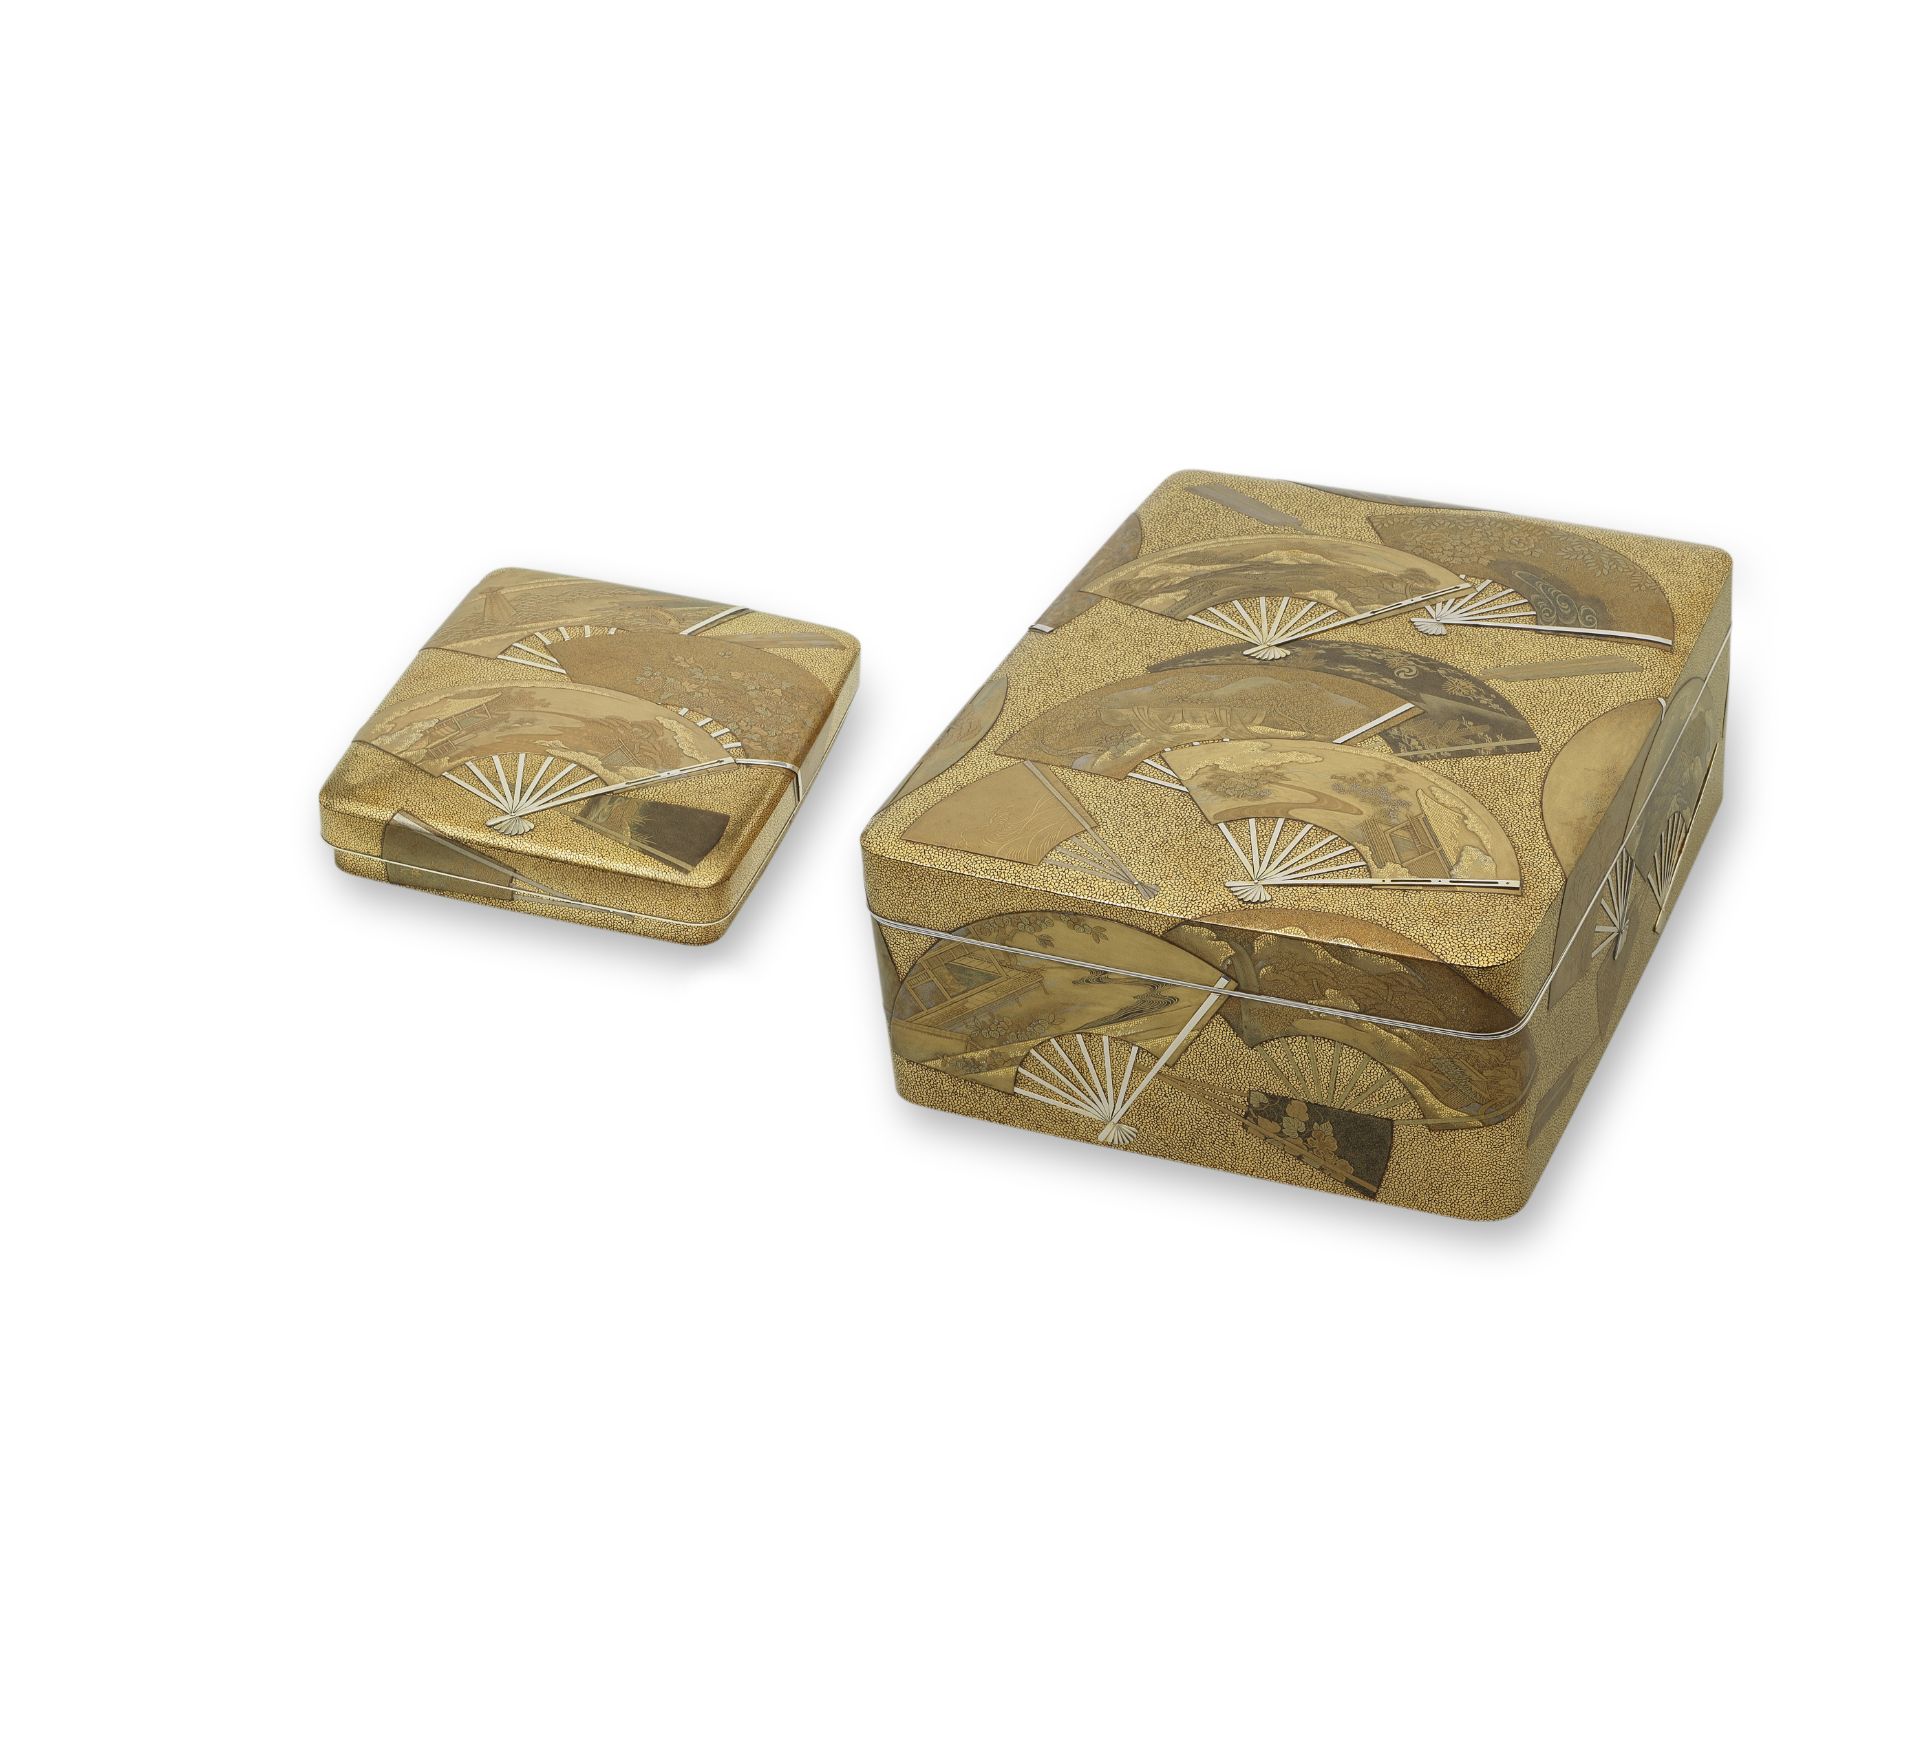 A MATCHING SET OF SILVER-INLAID AND GOLD-LACQUERED SUZURIBAKO (BOX FOR WRITING UTENSILS) AND RYO...